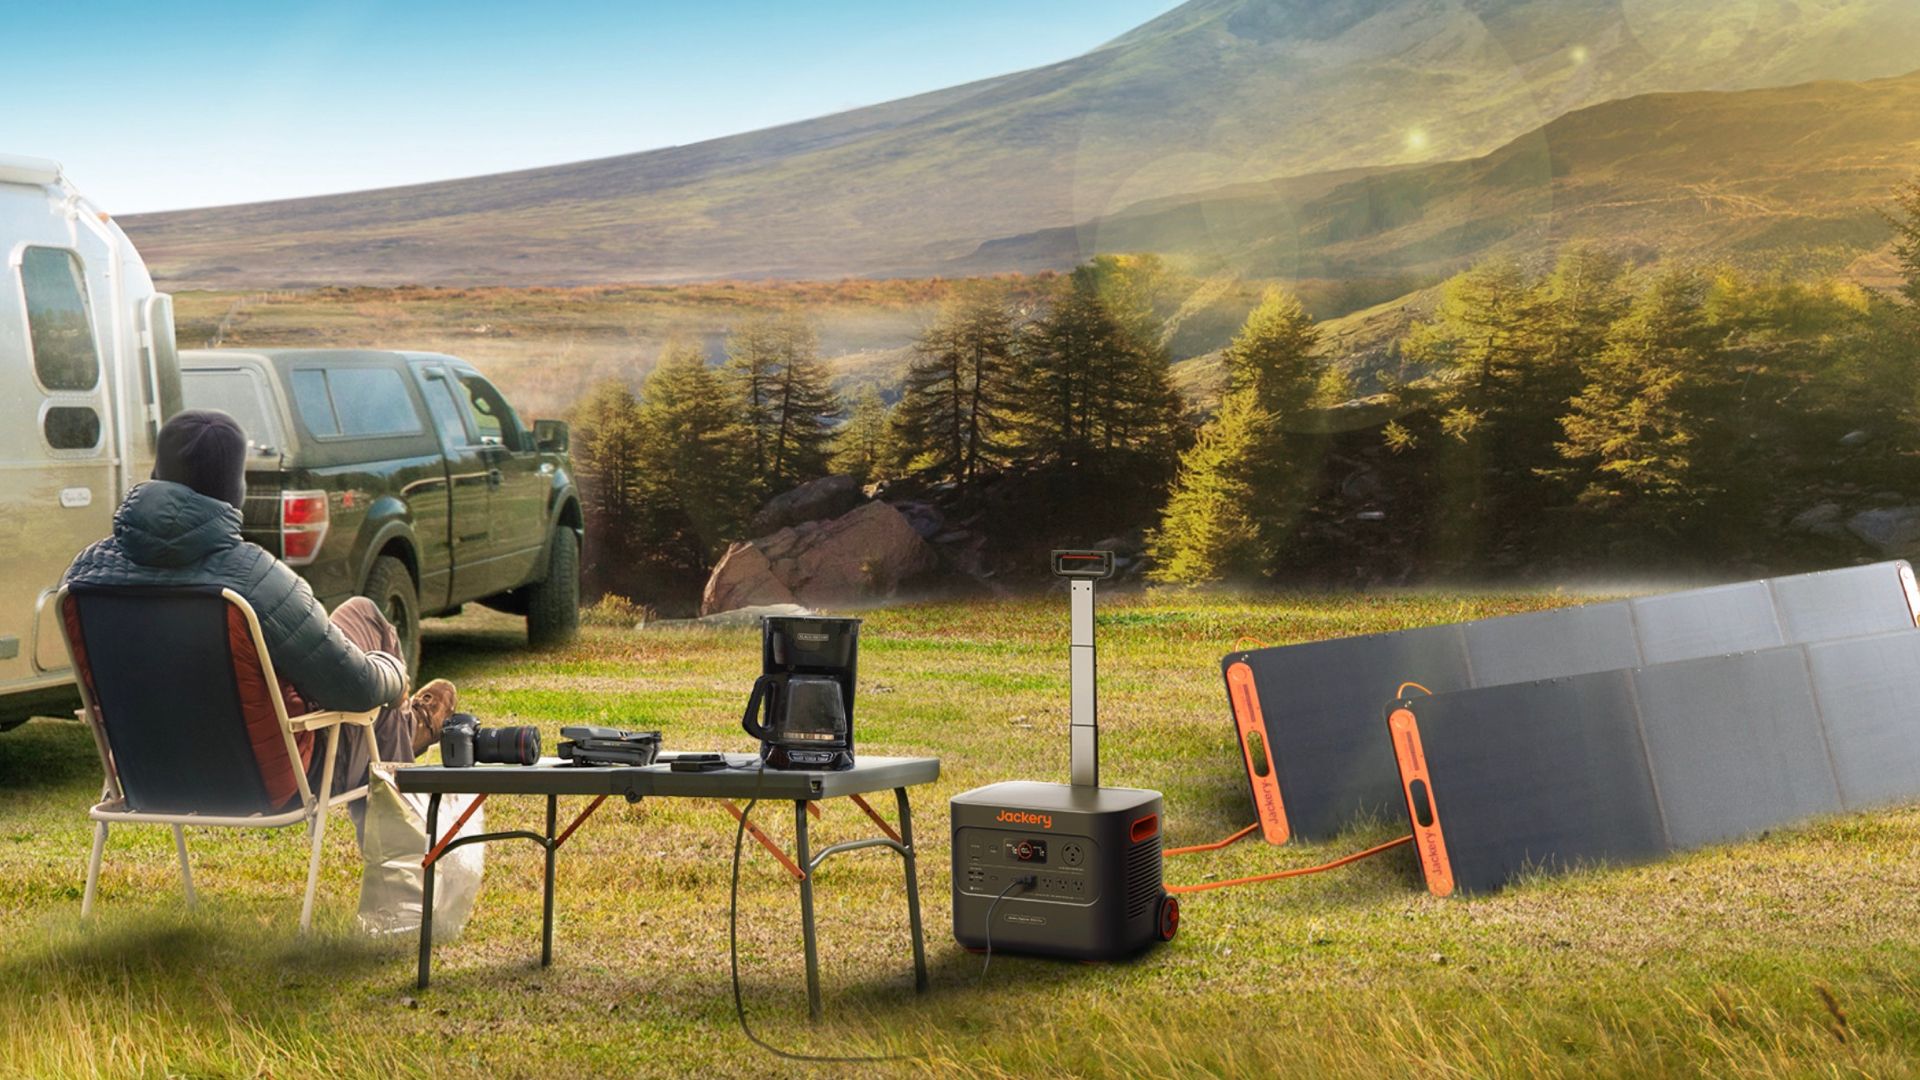 Jackery Solar Generator 3000 Pro at a camp site.